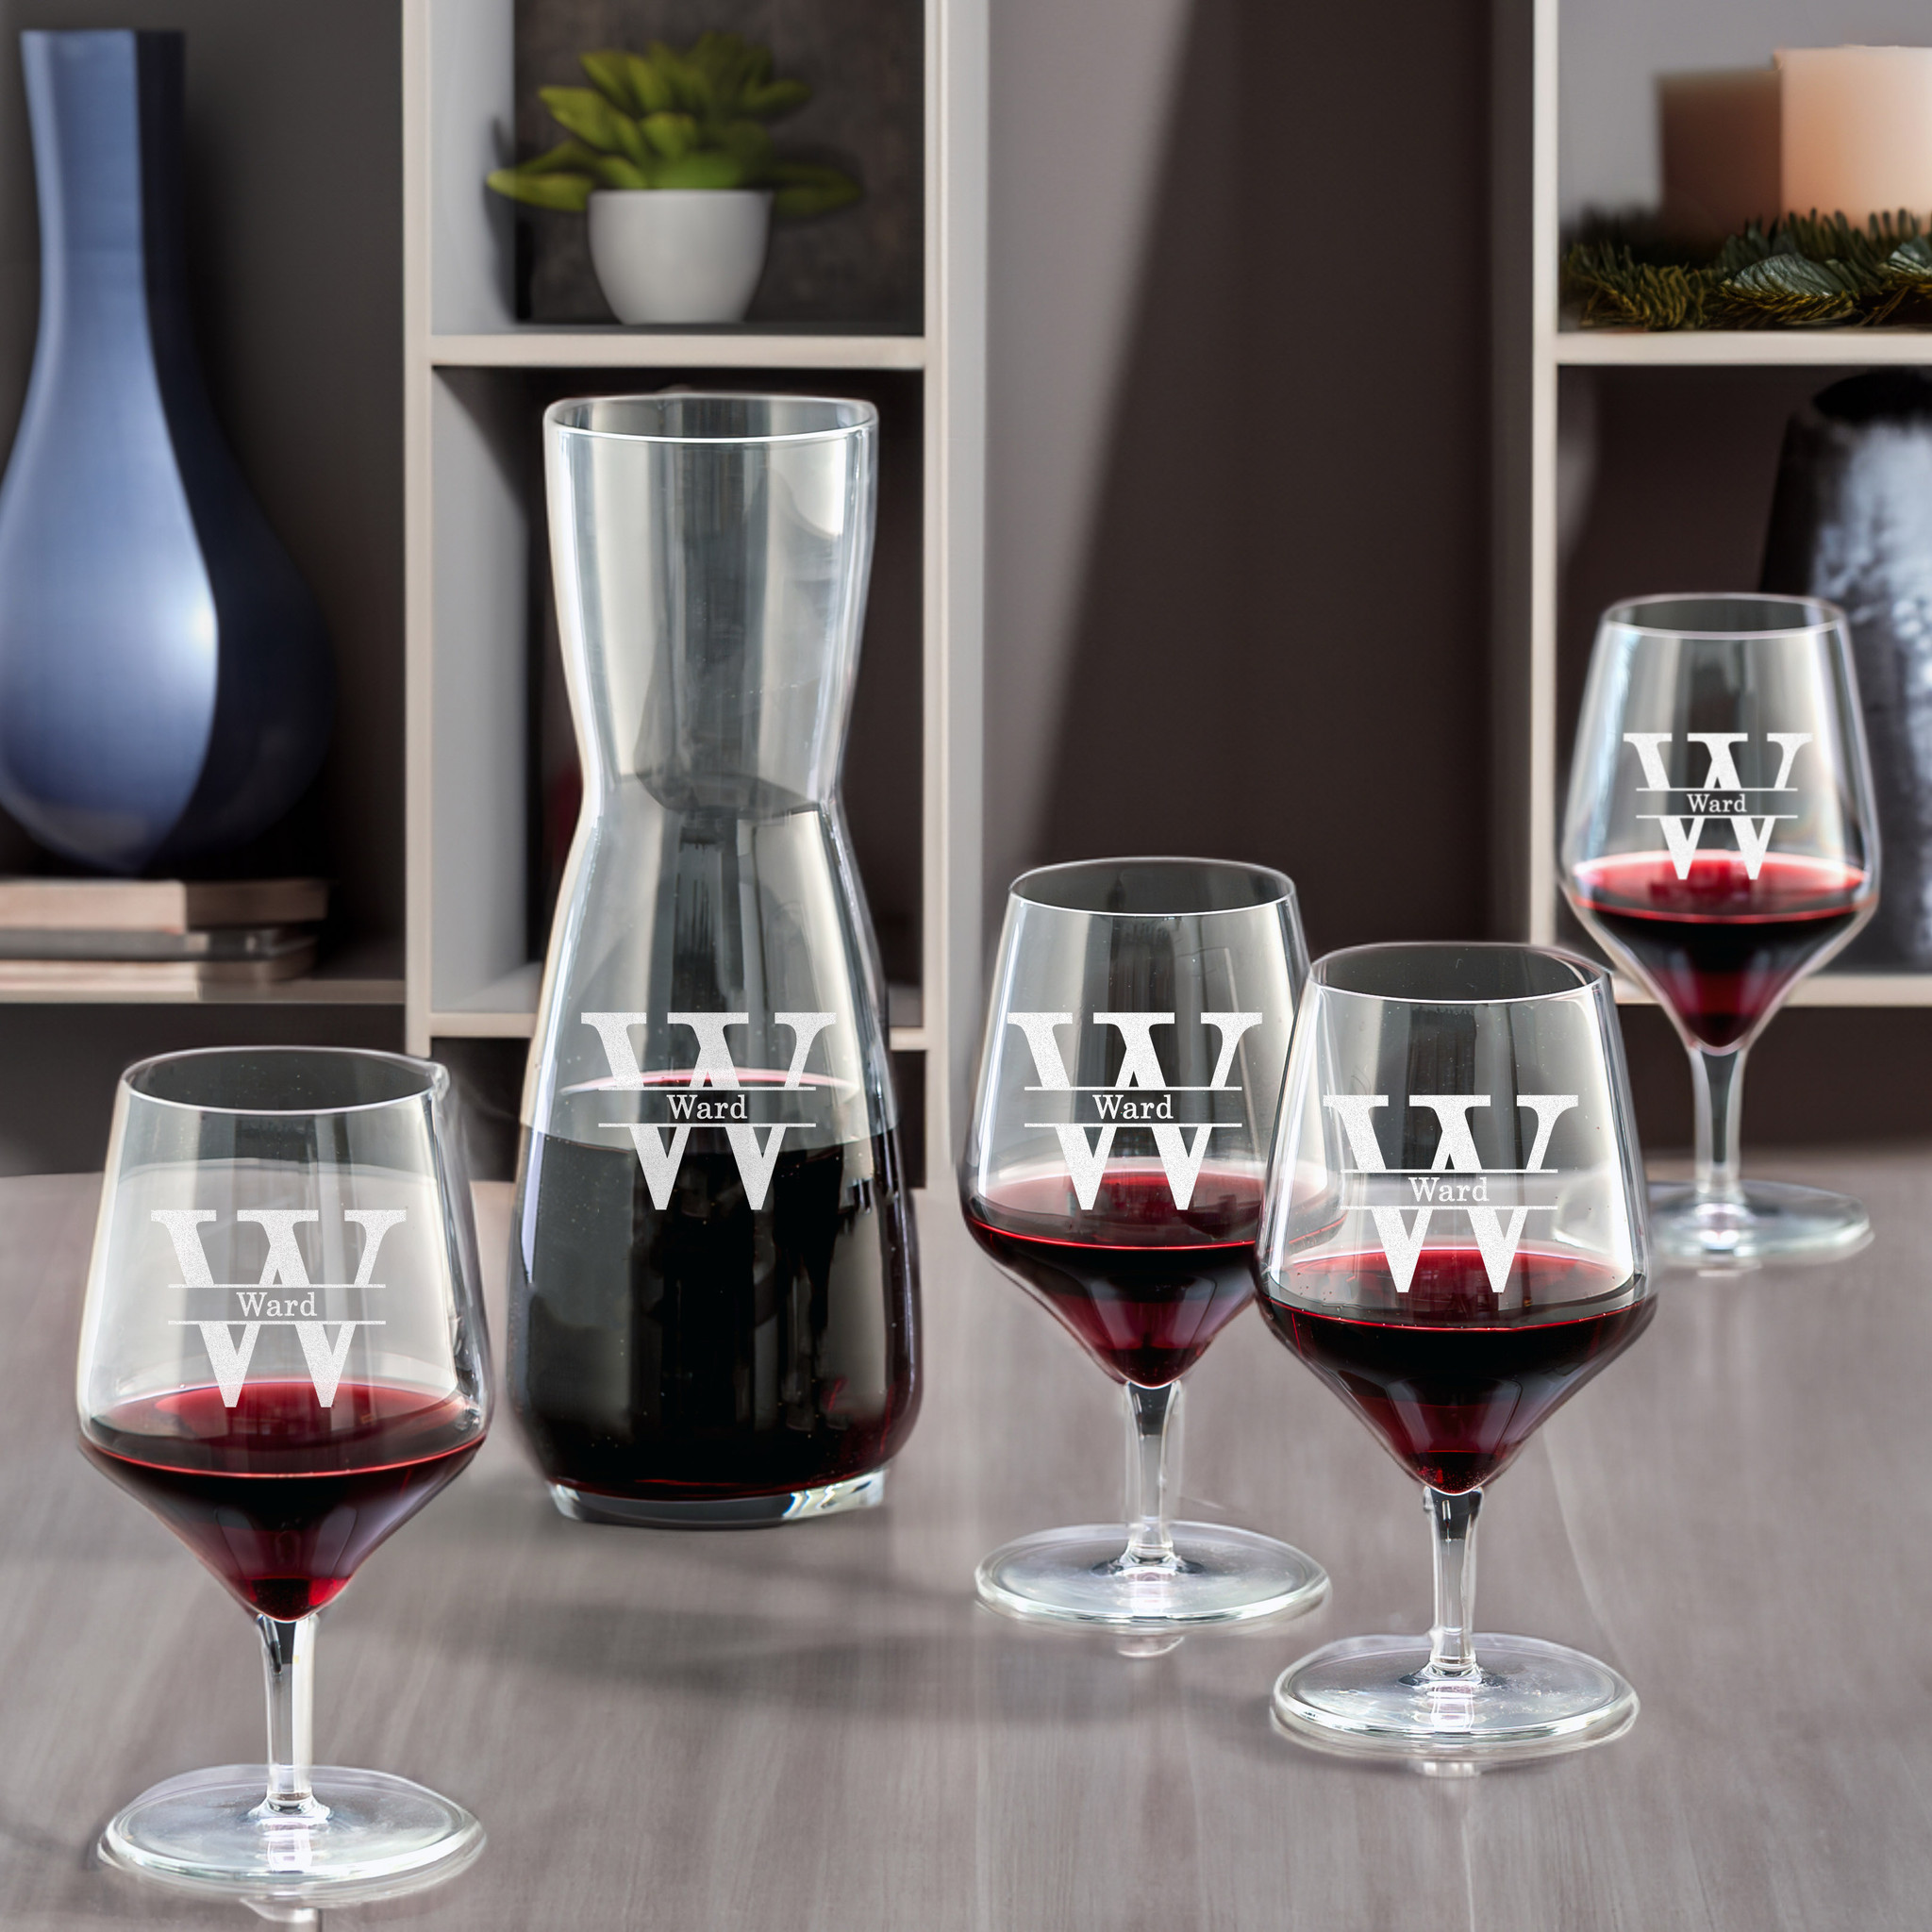 https://cdn11.bigcommerce.com/s-b5w84/images/stencil/2048x2048/products/3247/6175/9-27-23_wine_carafet_and_glasses_set-w__52352.1698943570.jpg?c=2